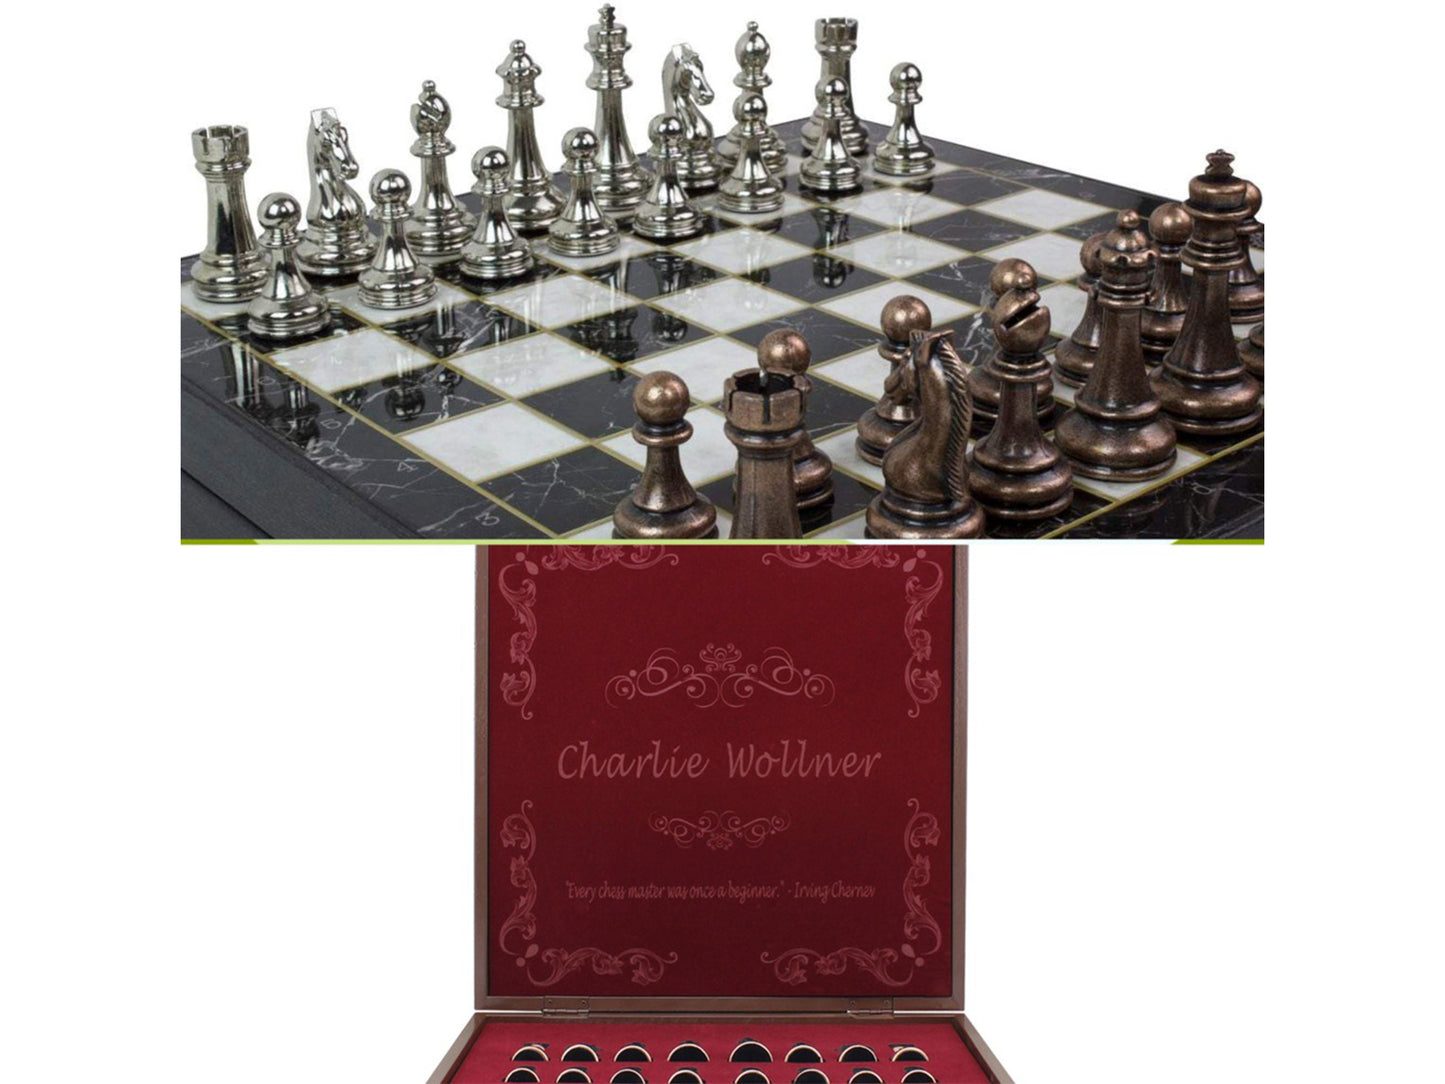 Marble Patterned Chess Box Set with Bronze & Silver Colored Metal Staunton Chessmen (customized inside)